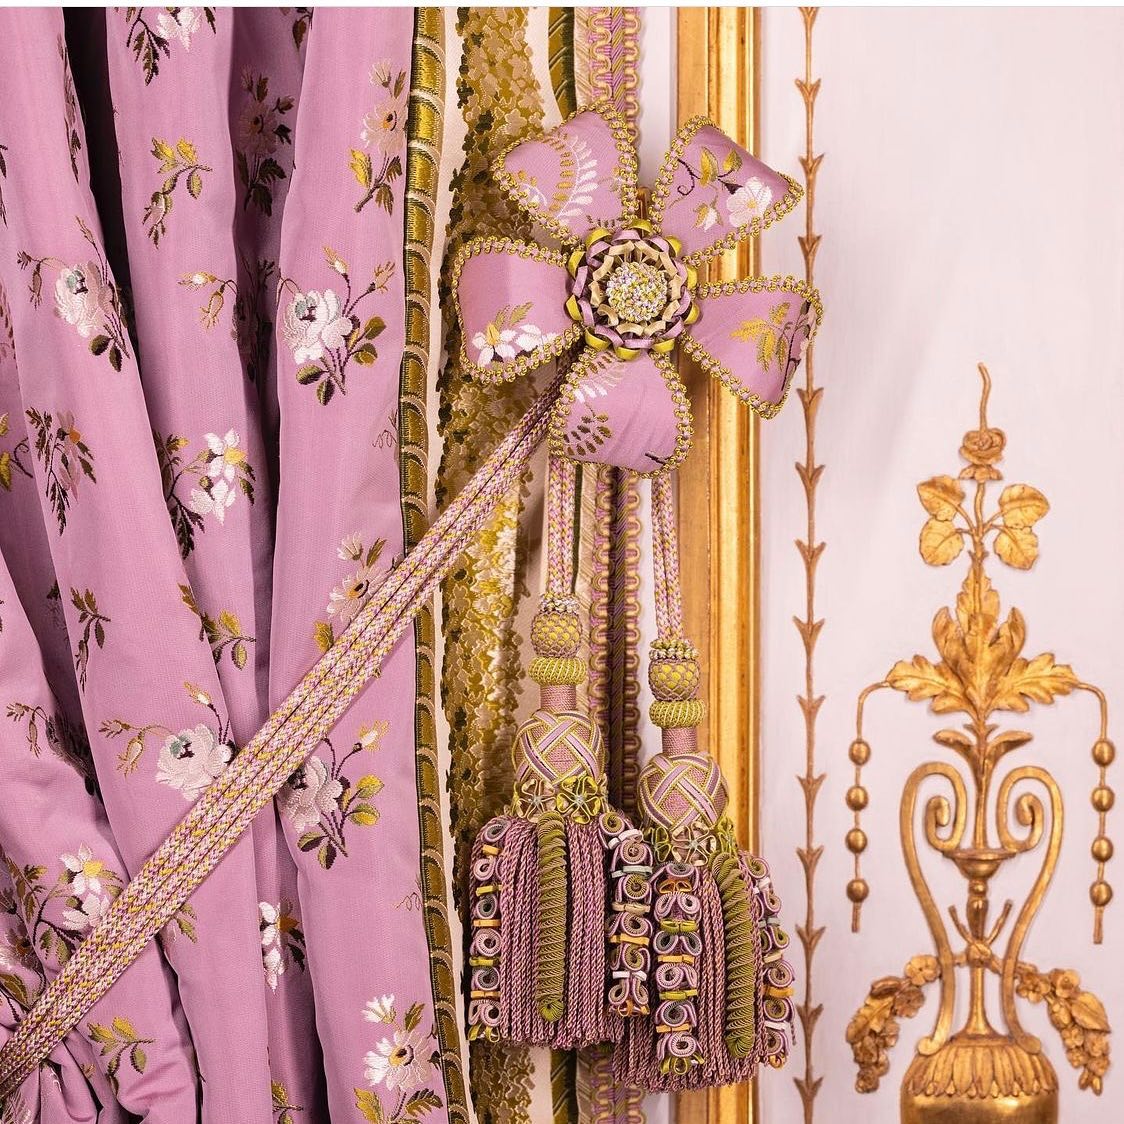 Pretty in Pink via @chateauversailles. These draperies are in the meridian cabinet in the intimate part of Marie Antoinette’s apartment at Versailles. After 3 years of architectural restoration, the curators turned to the fabrics. Using modern techniques to analyze original textiles recovered the color lab helped craft a color scheme based on the colors that the Queen would have known in 1784. This silk fabric is a delicate embroidery of small flowers and foliage on a lilac background. The panels were further embellished with trim and tied back with corded tassel Tiebacks held by a rosette. It’s all in the details! #chateaudeversailles #paris #france #palaceofversailles #stunningsilks #perfectpassementerie 📸 EPV/ Thomas Garnier